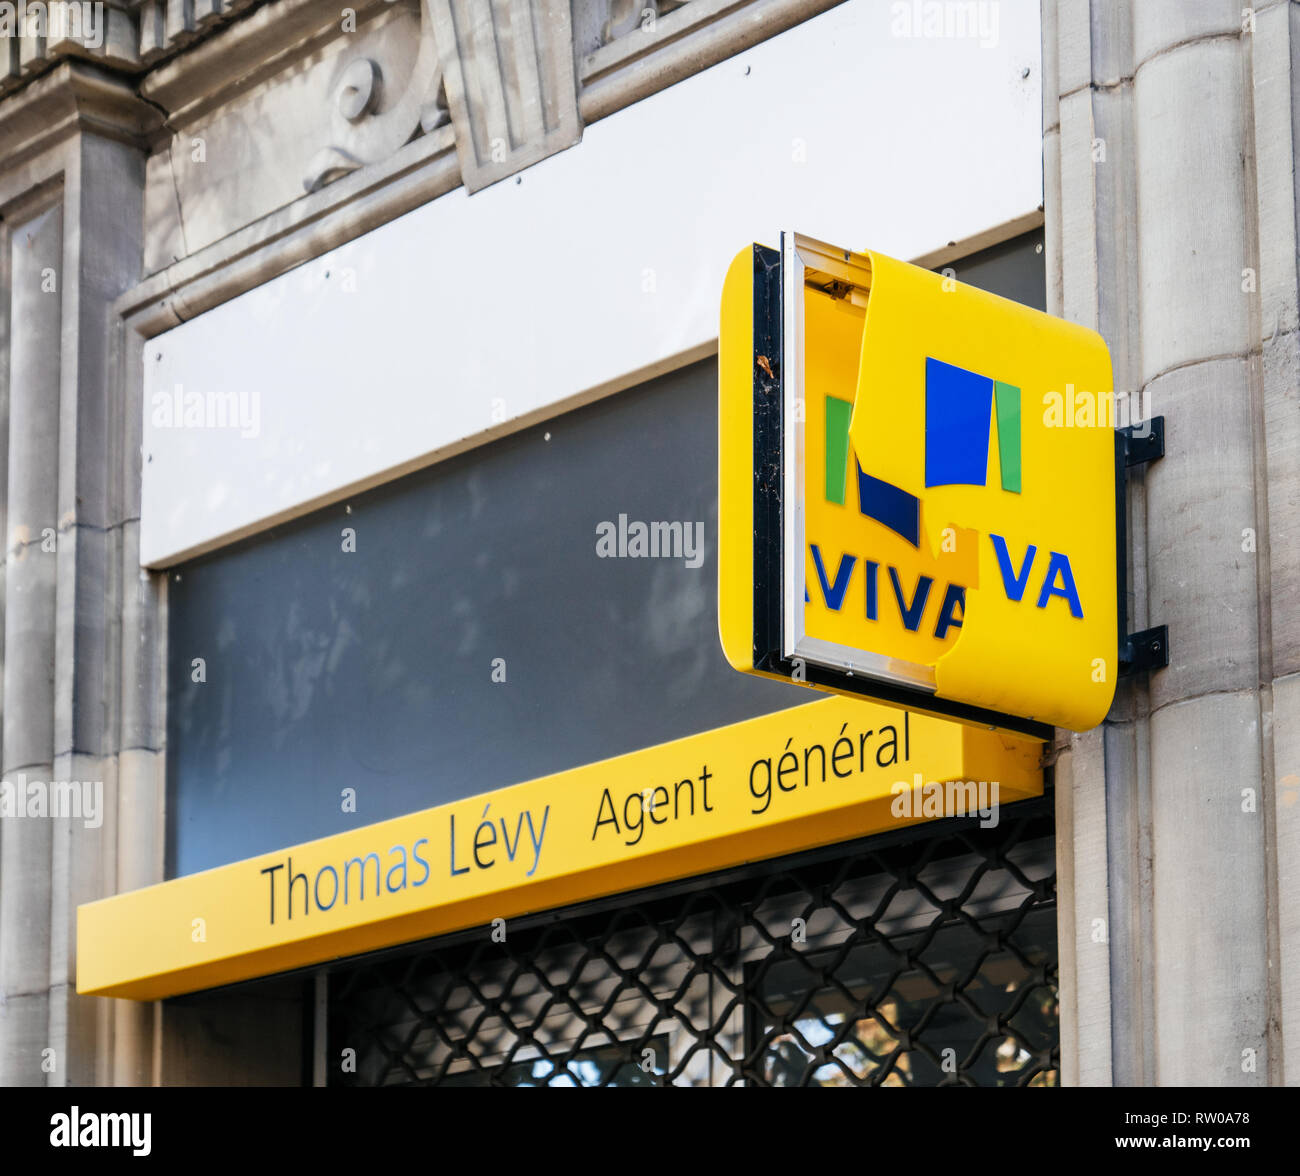 Strasbourg, France - Oct 1, 2017: Aviva insurance anget signage advertsing destroyed by vandals street view - Aviva is a British multinational insurance company Thomas Levy Agent General  Stock Photo